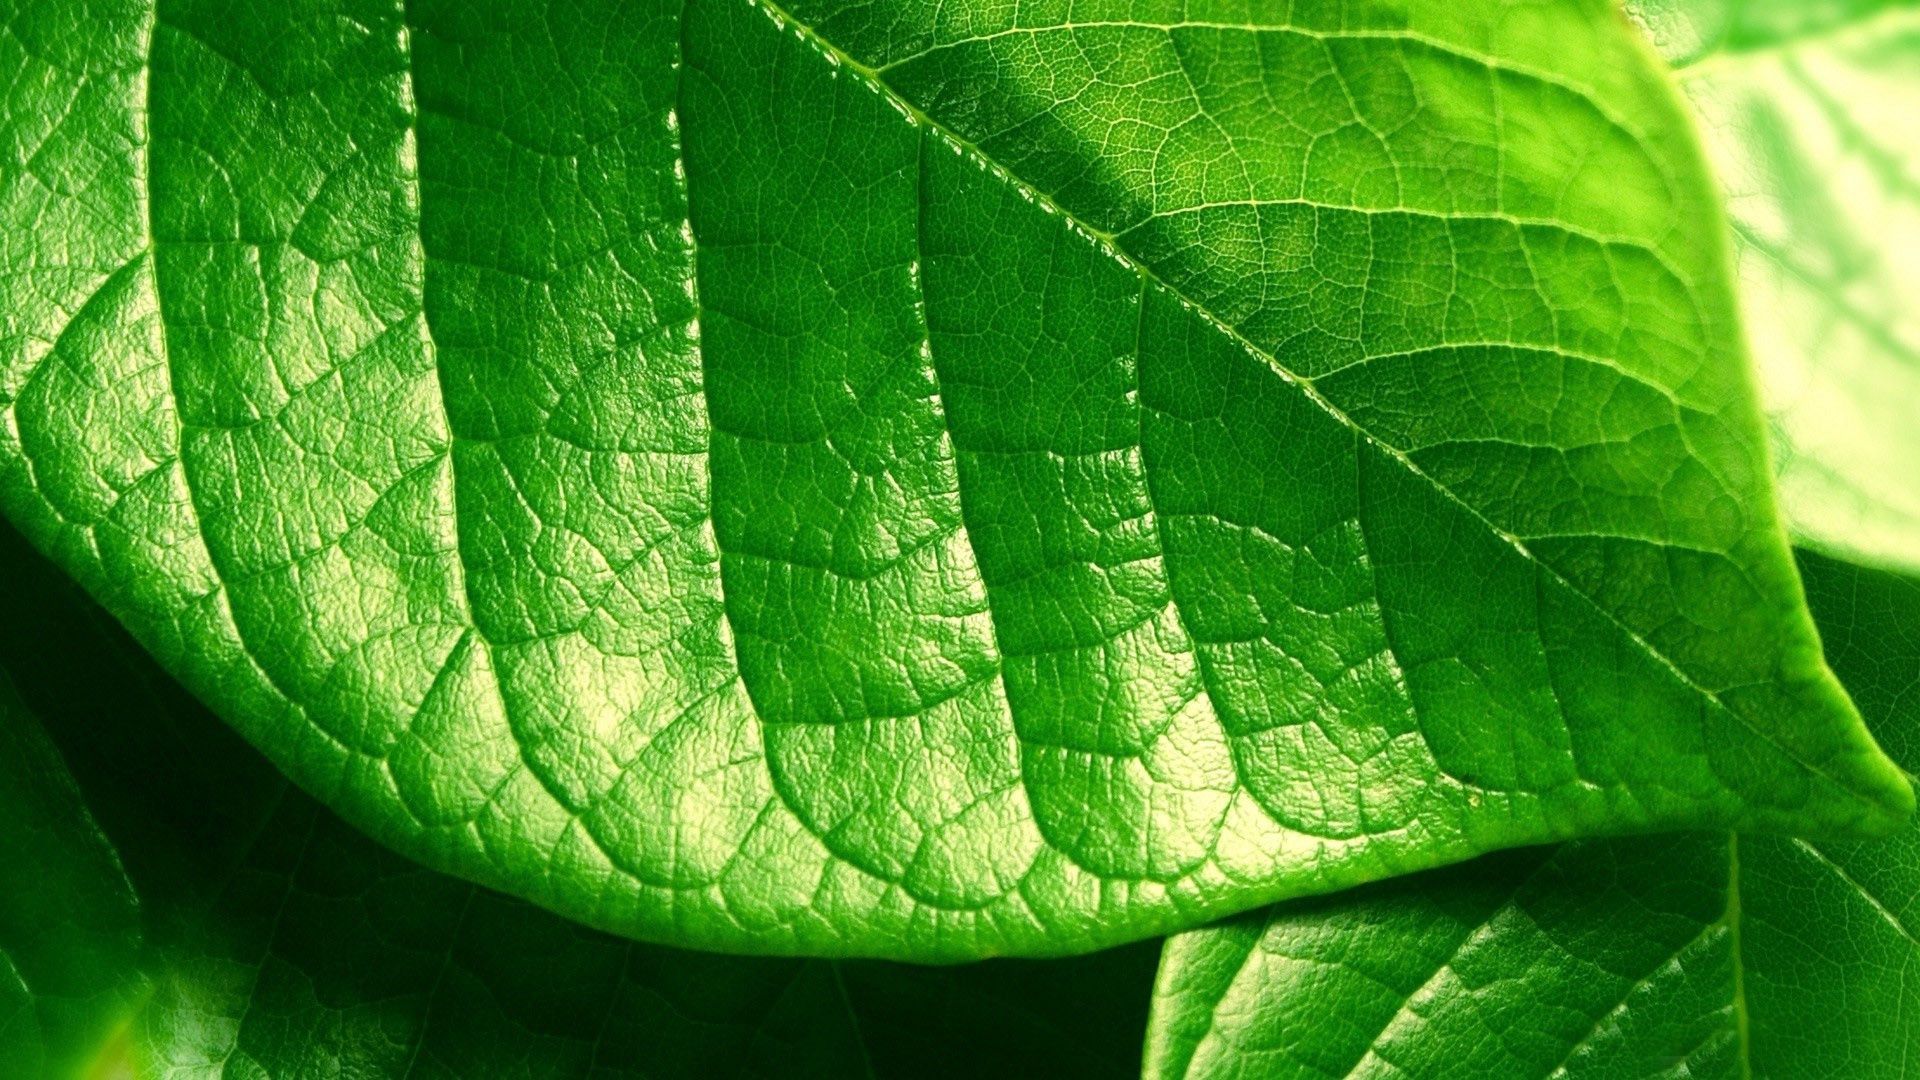 Leaf Pictures - Green Leaf Hd Images Free Download , HD Wallpaper & Backgrounds